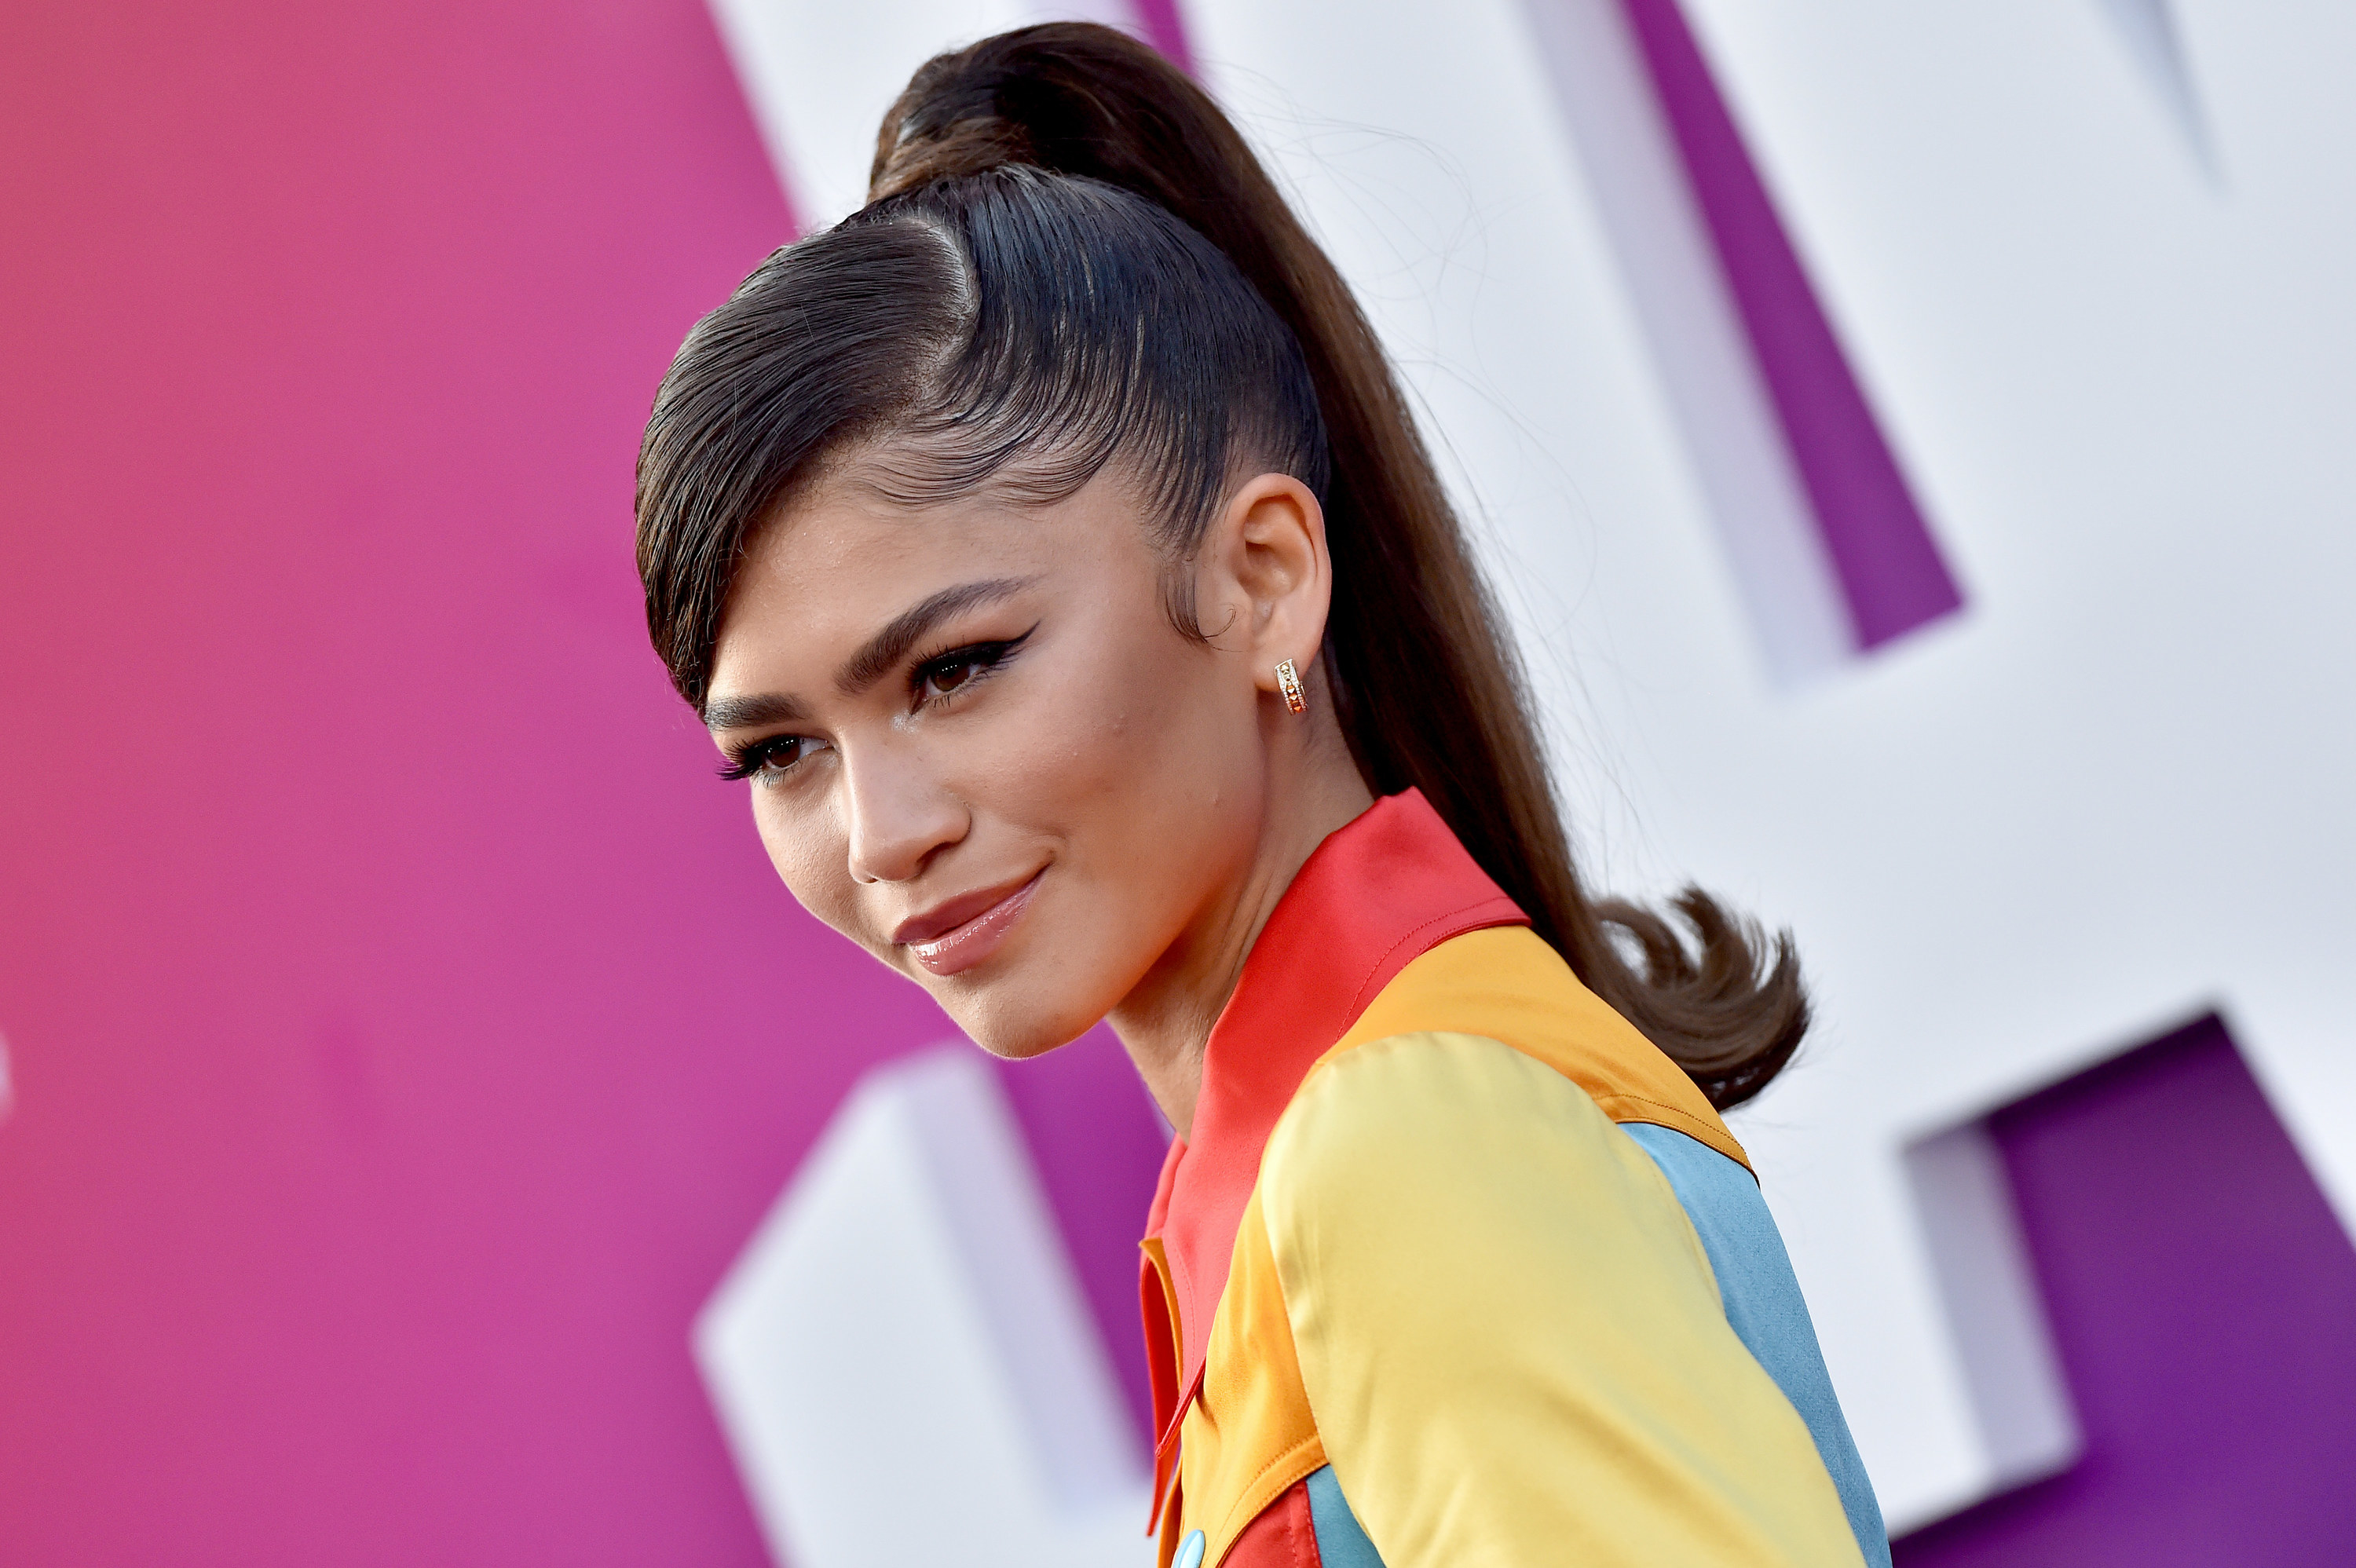 Zendaya is photographed at a film premiere in Los Angeles